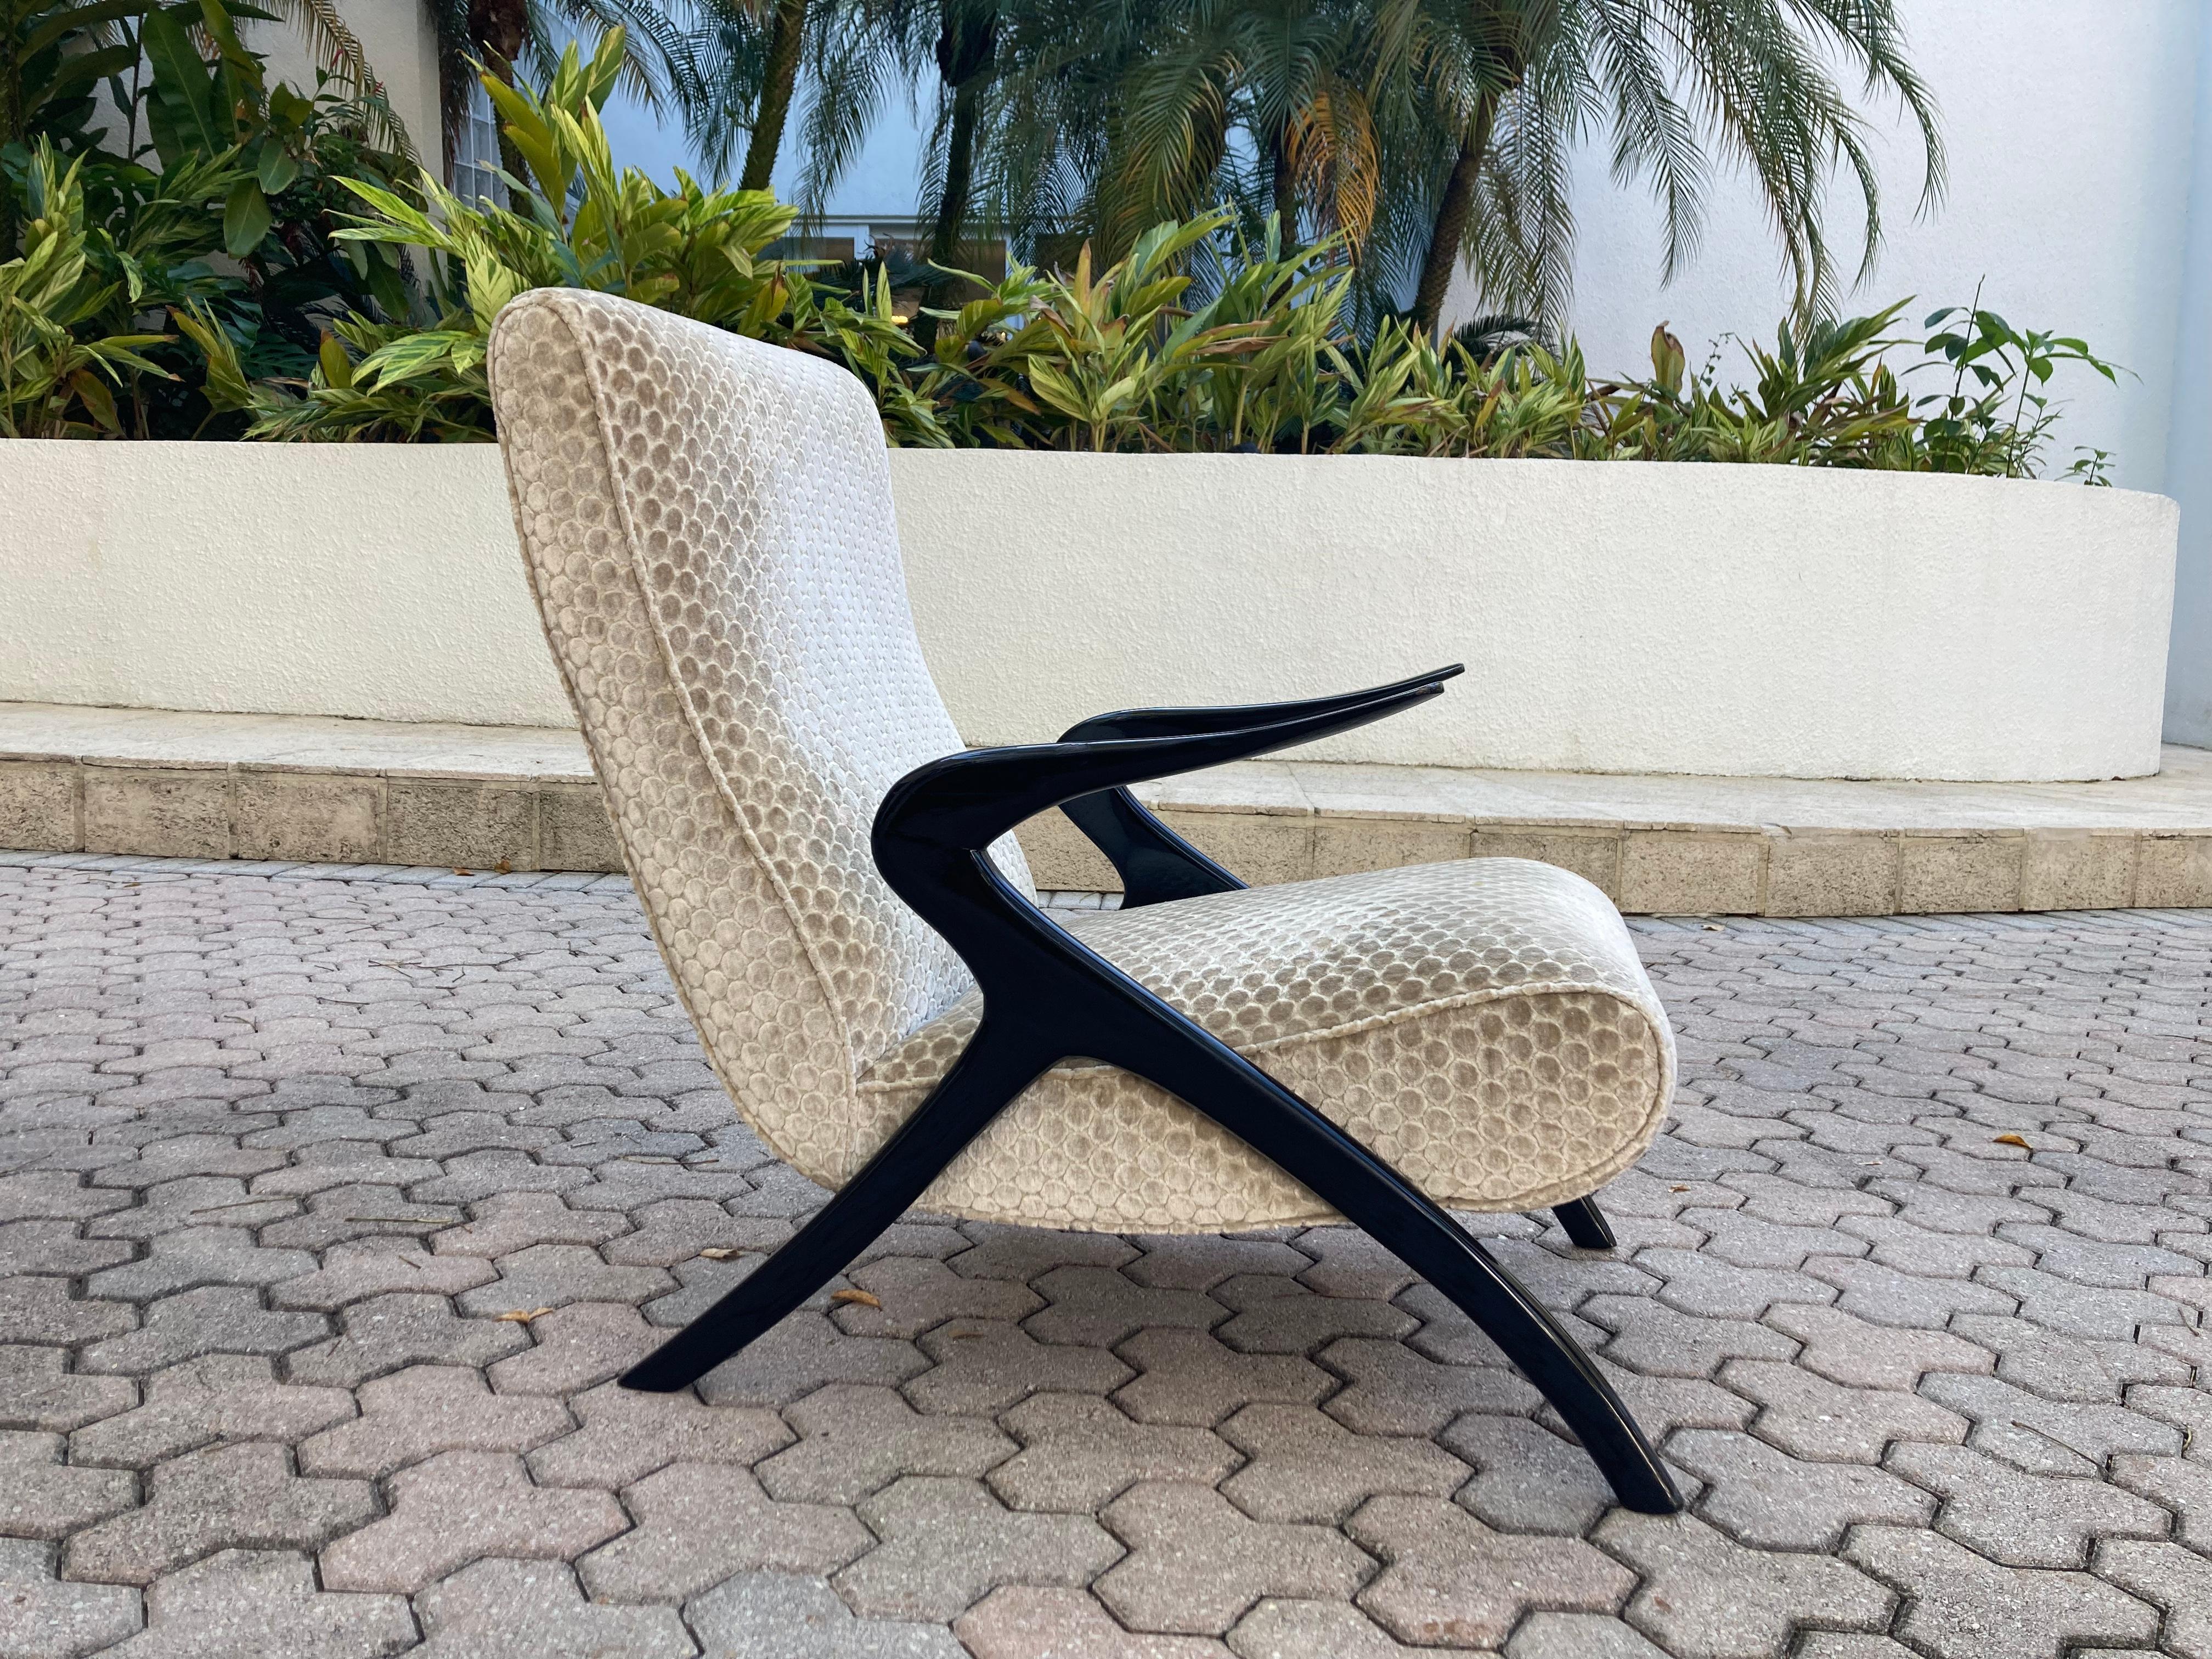 Italian Mid-Century Modern lounge chair, black painted wood and fabric covered seat and back.